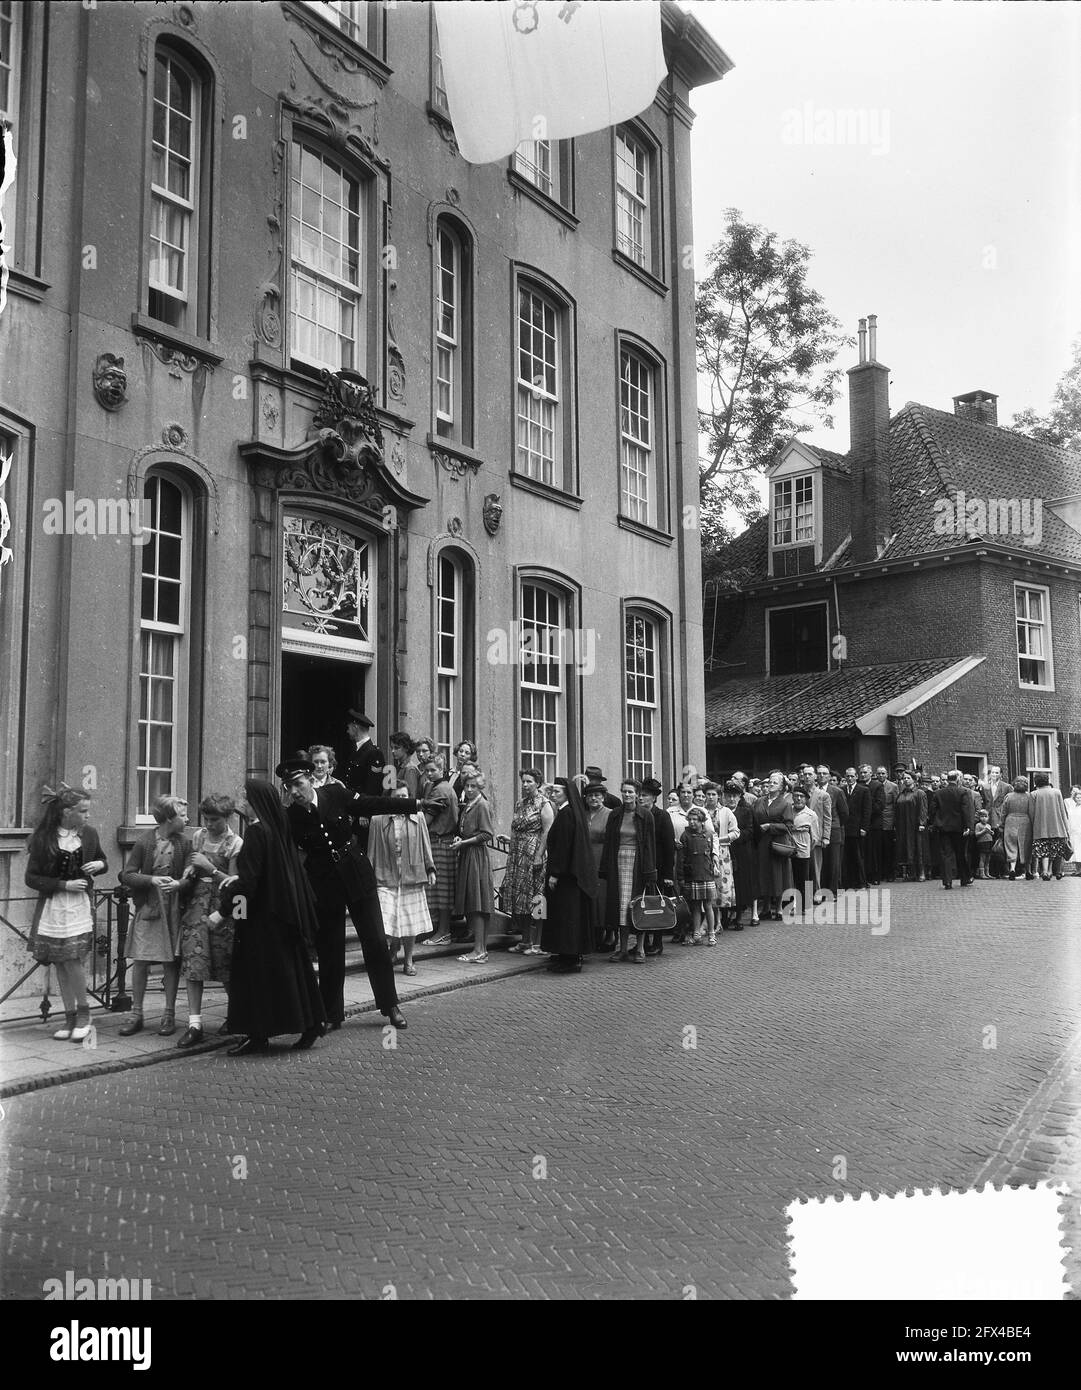 Amersfoort funeral procession at the funeral bier Cardinal De Jong, interested people in a queue at the Zuidsingel, September 9, 1955, INTERESTED PARTIES, Defile, rows, The Netherlands, 20th century press agency photo, news to remember, documentary, historic photography 1945-1990, visual stories, human history of the Twentieth Century, capturing moments in time Stock Photo